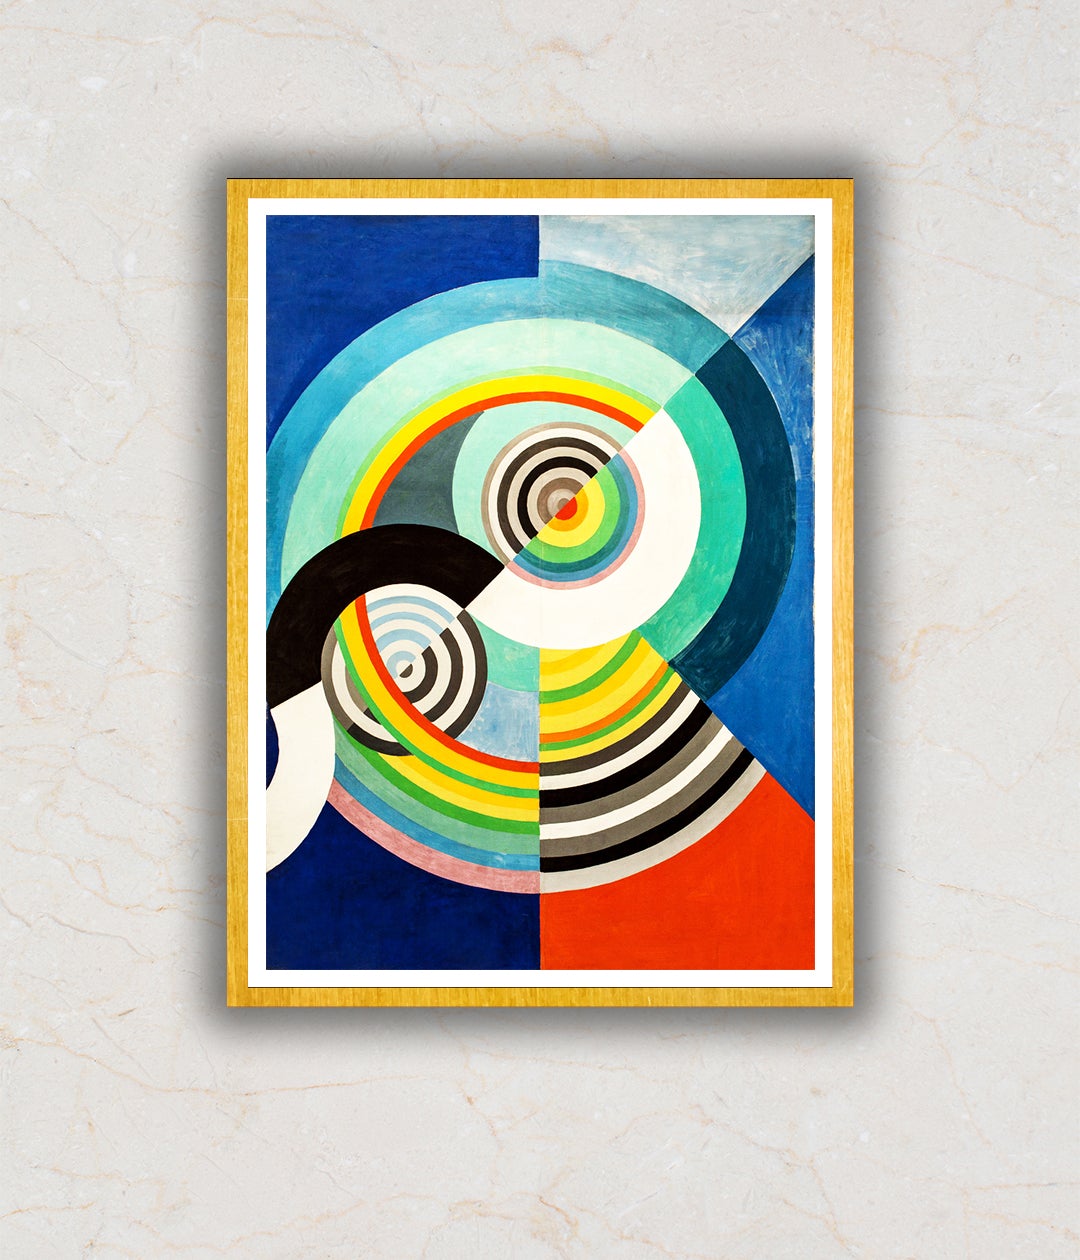 Rhythm Modern Abstract Painting Artwork For Home Wall DŽcor by Robert Delaunay 1